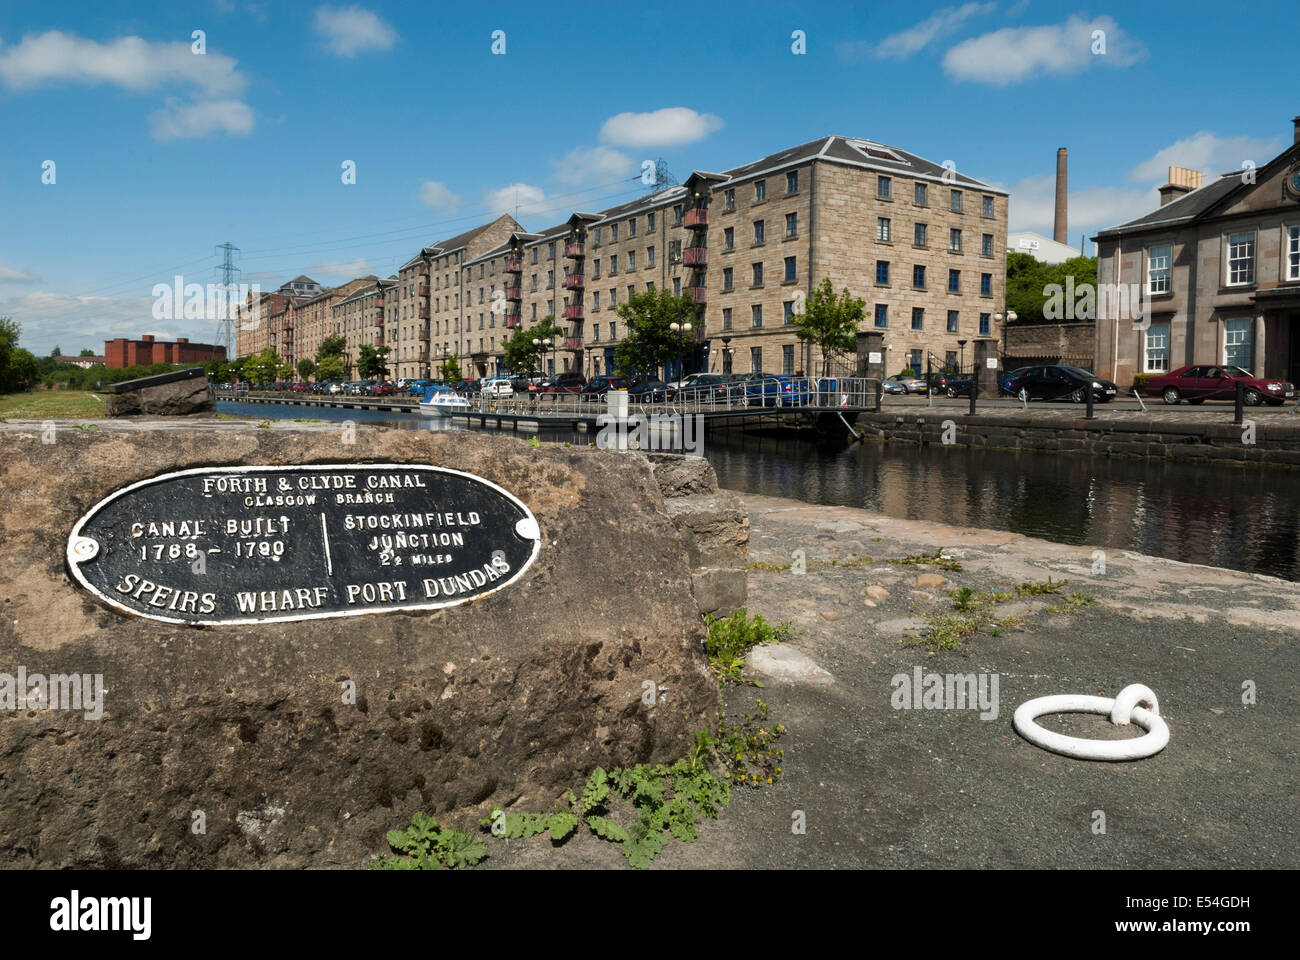 Speirs Wharf plaque at the Forth & Clyde Canal in Glasgow City Centre. Stock Photo